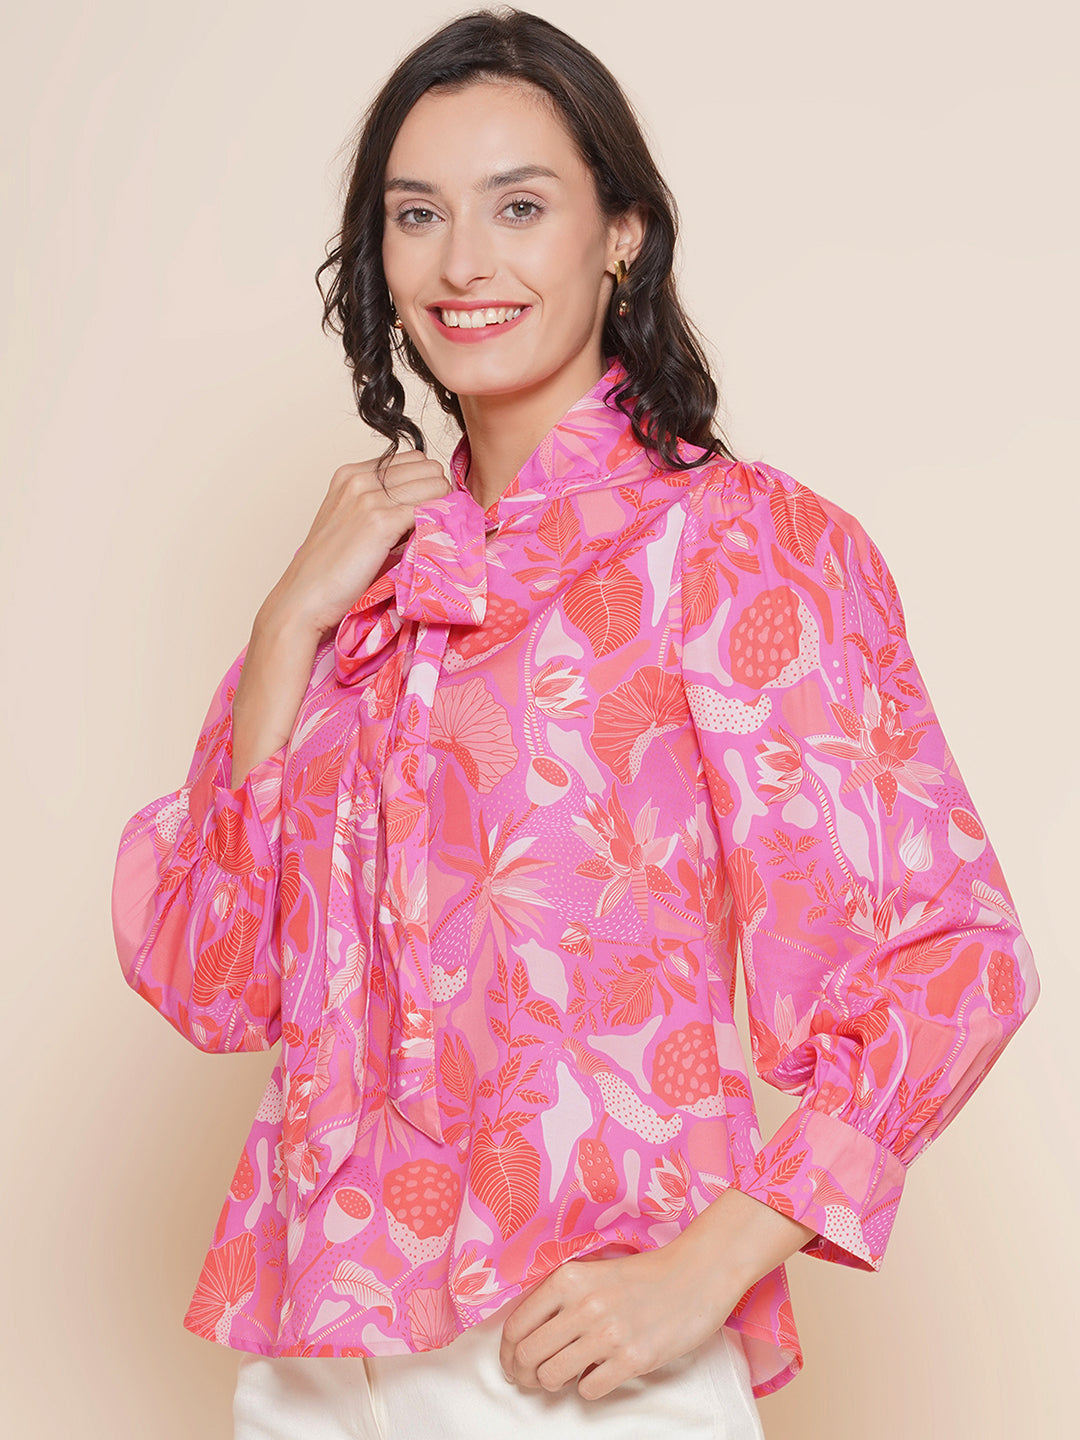 Bhama Couture Pink Floral Printed Top